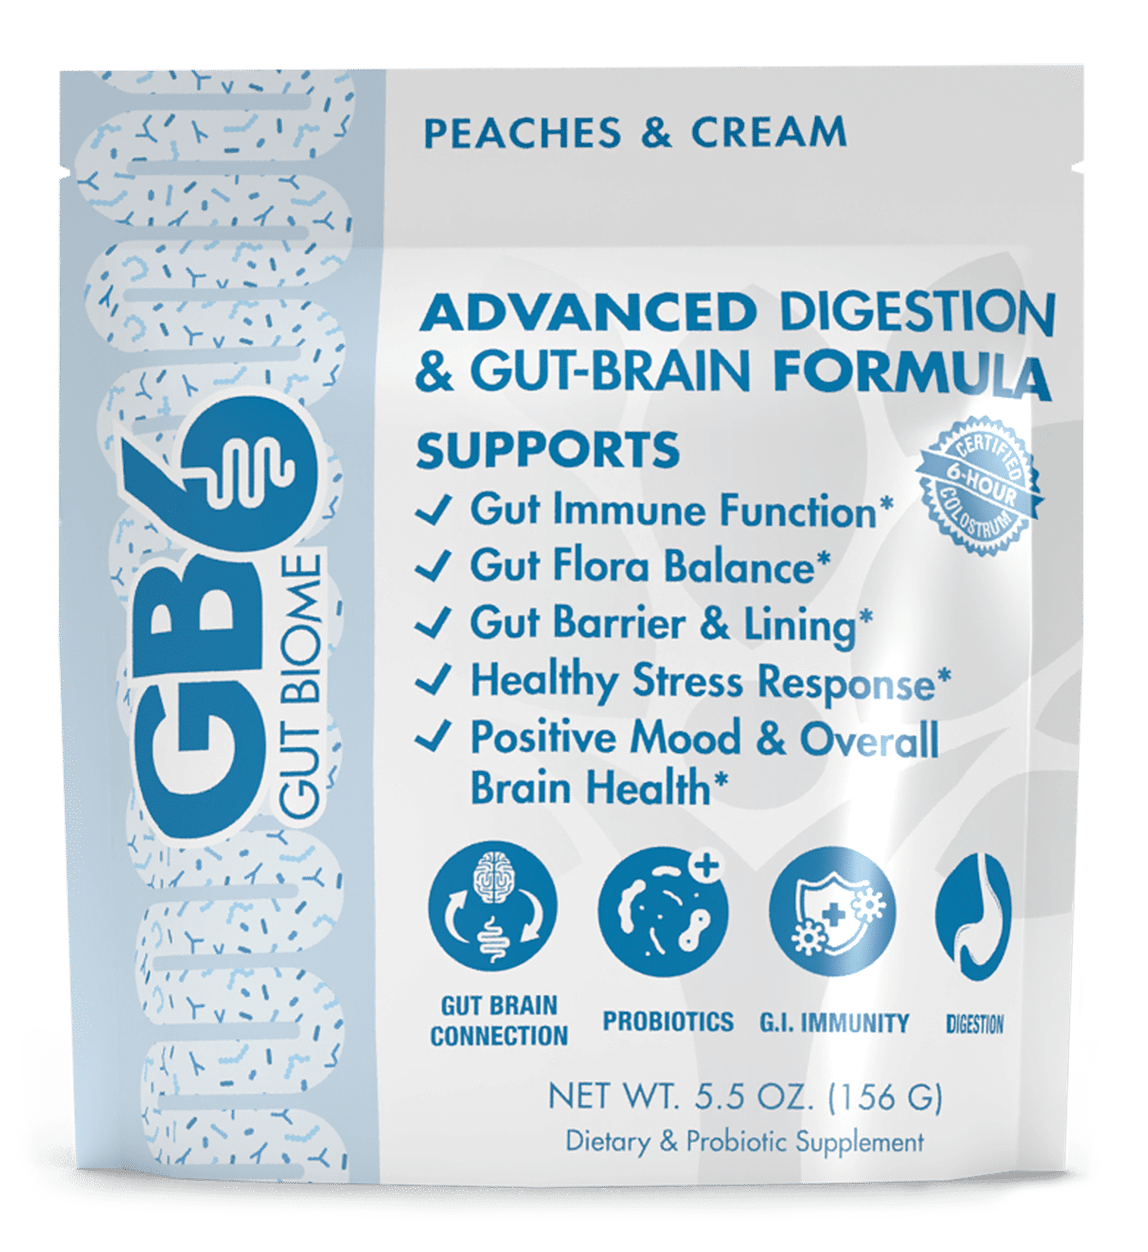 Our advanced digestion and gut-brain formula is designed to support gut immune function, gut flora balance, gut barrier and lining, healthy stress response, positive mood, and overall brain health. Trust your gut and try GutBiome6 today.